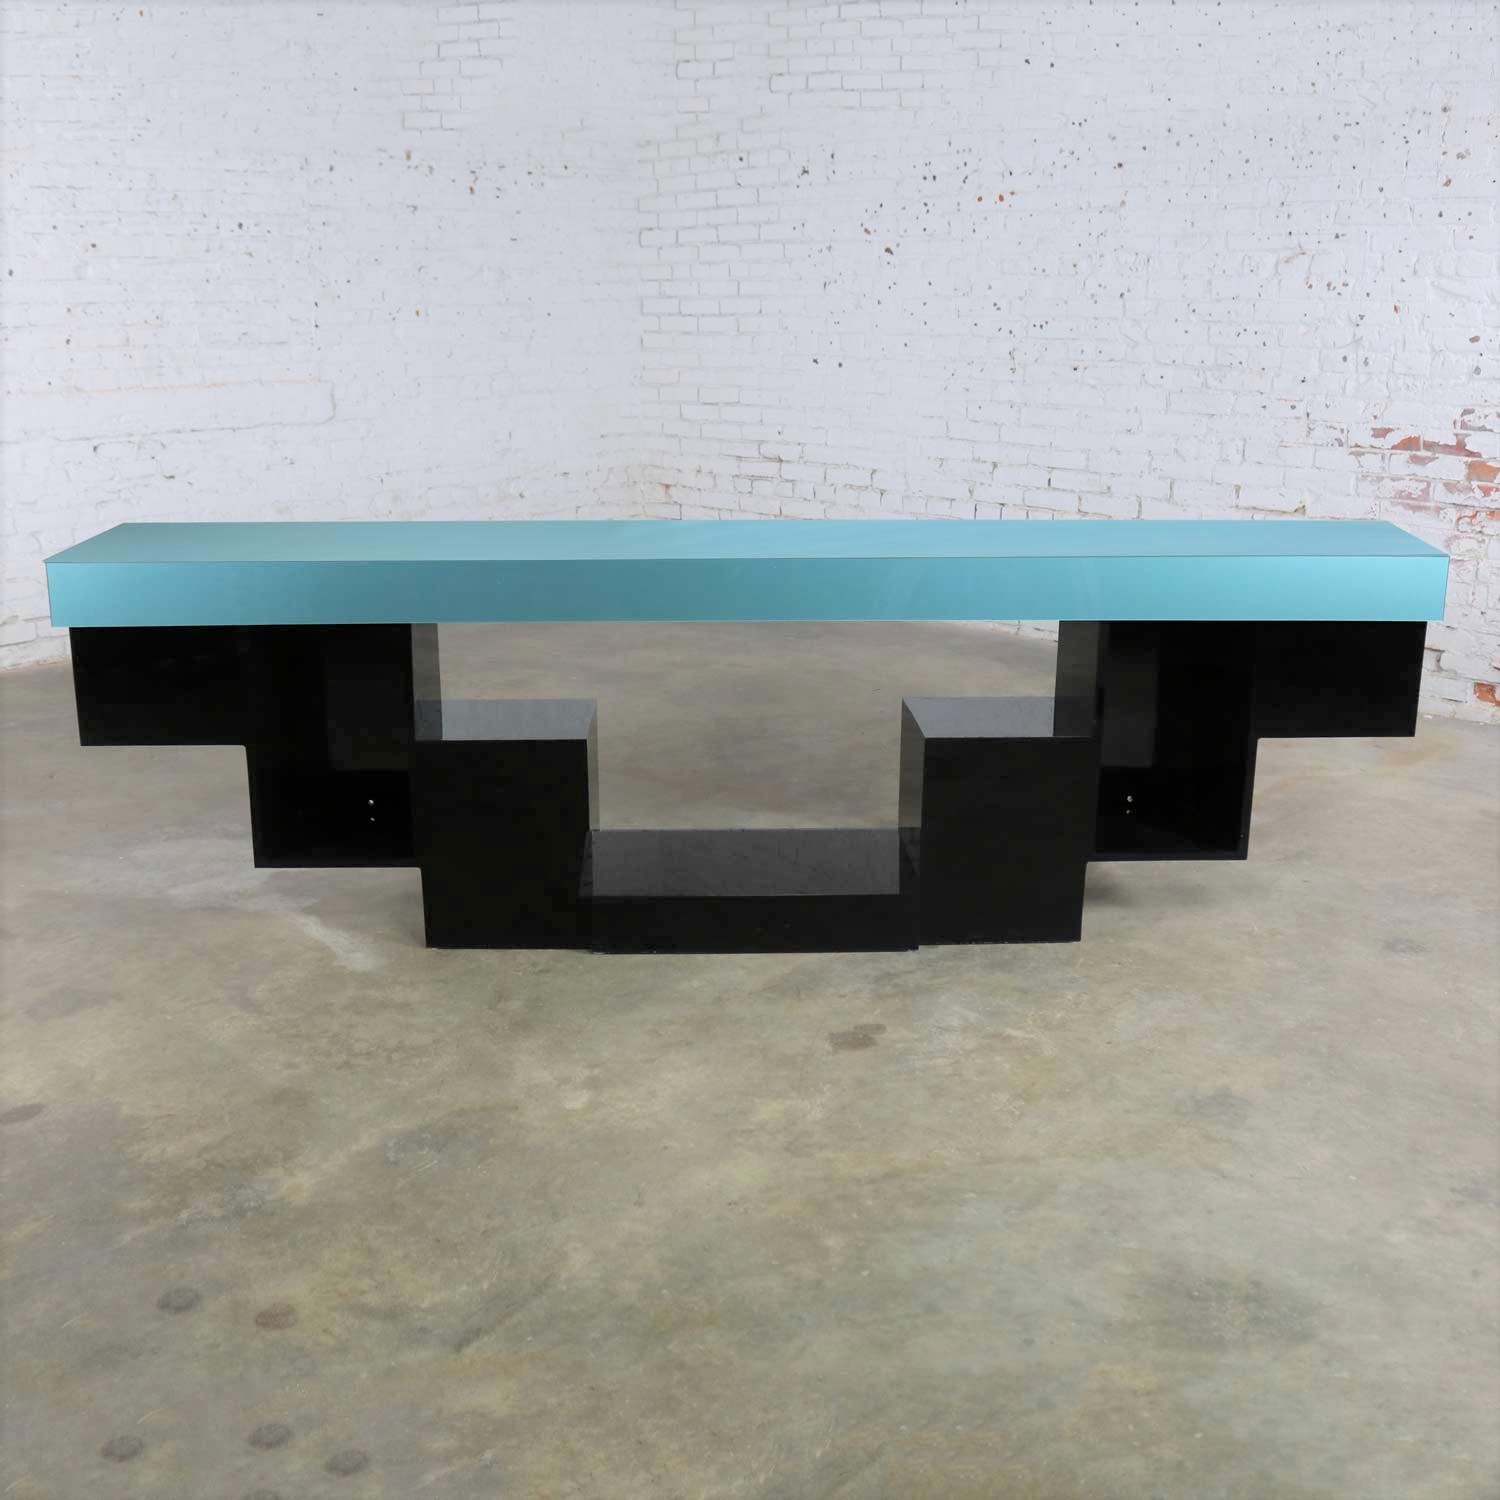 Modern Zig Zag Stepped Plexiglass Clad Console Table or Credenza in Black and Teal